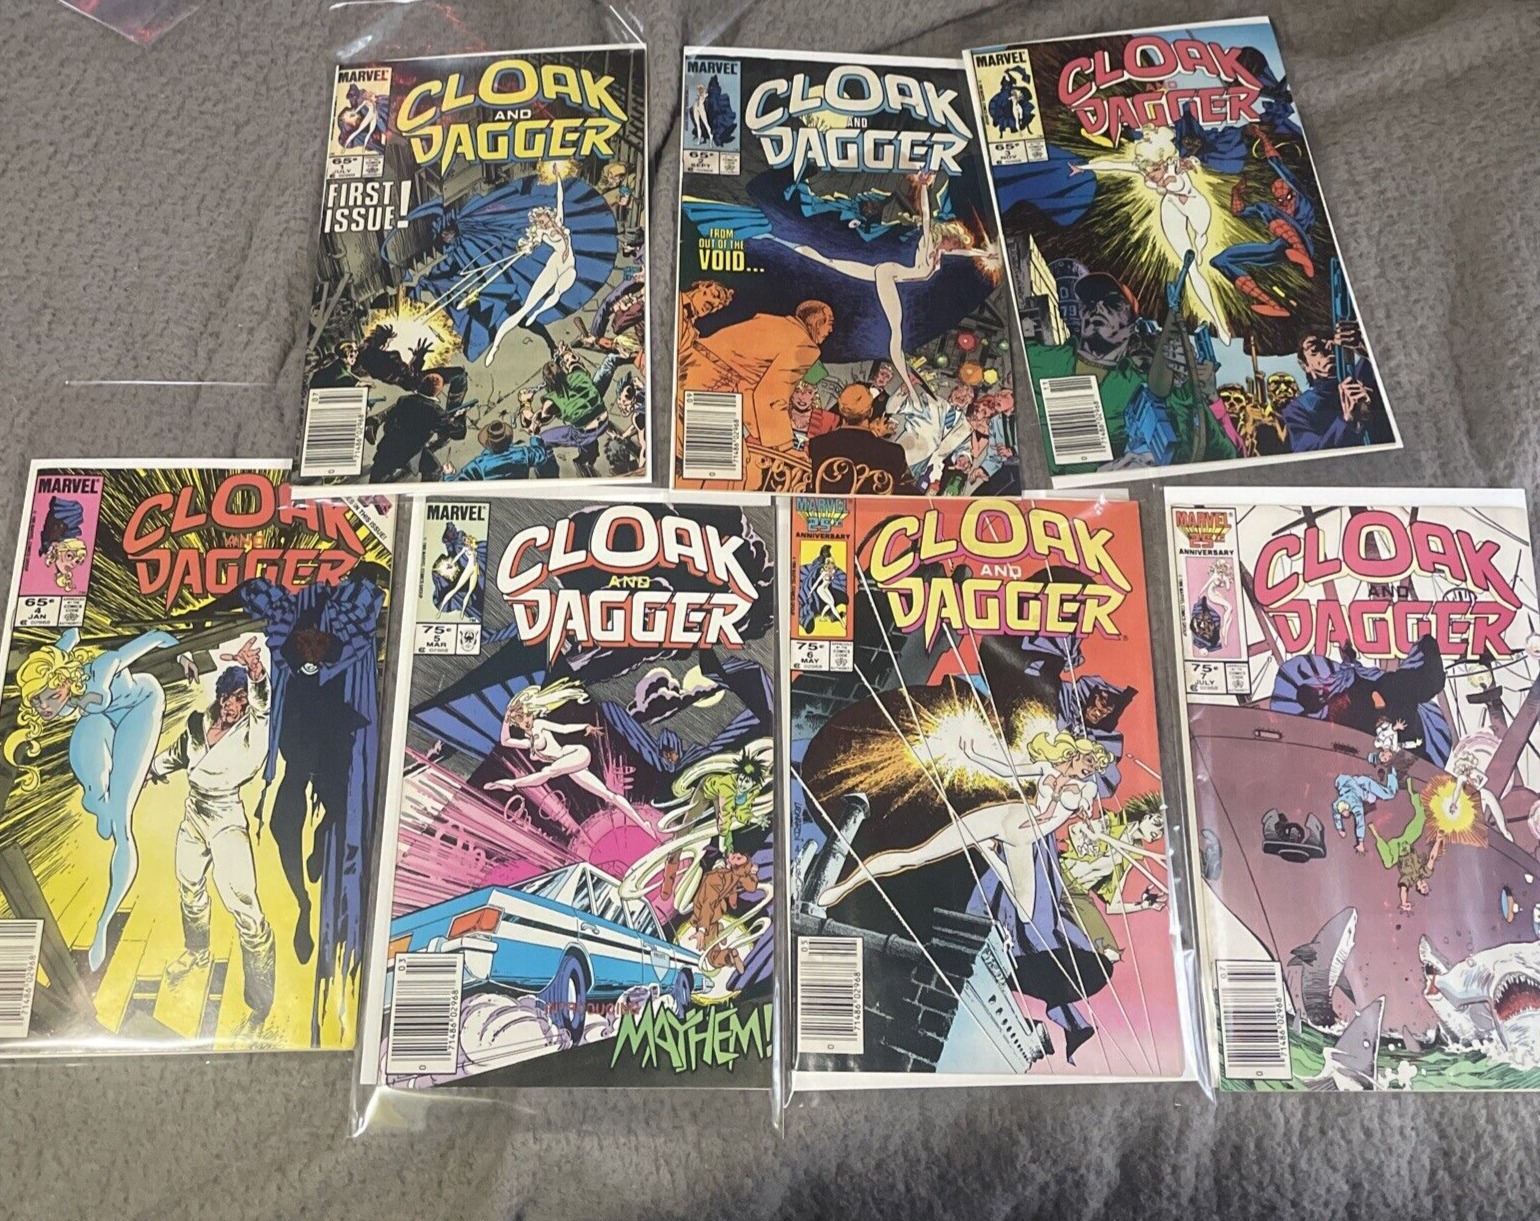 Cloak and Dagger #1-#7, Bagged and Boarded